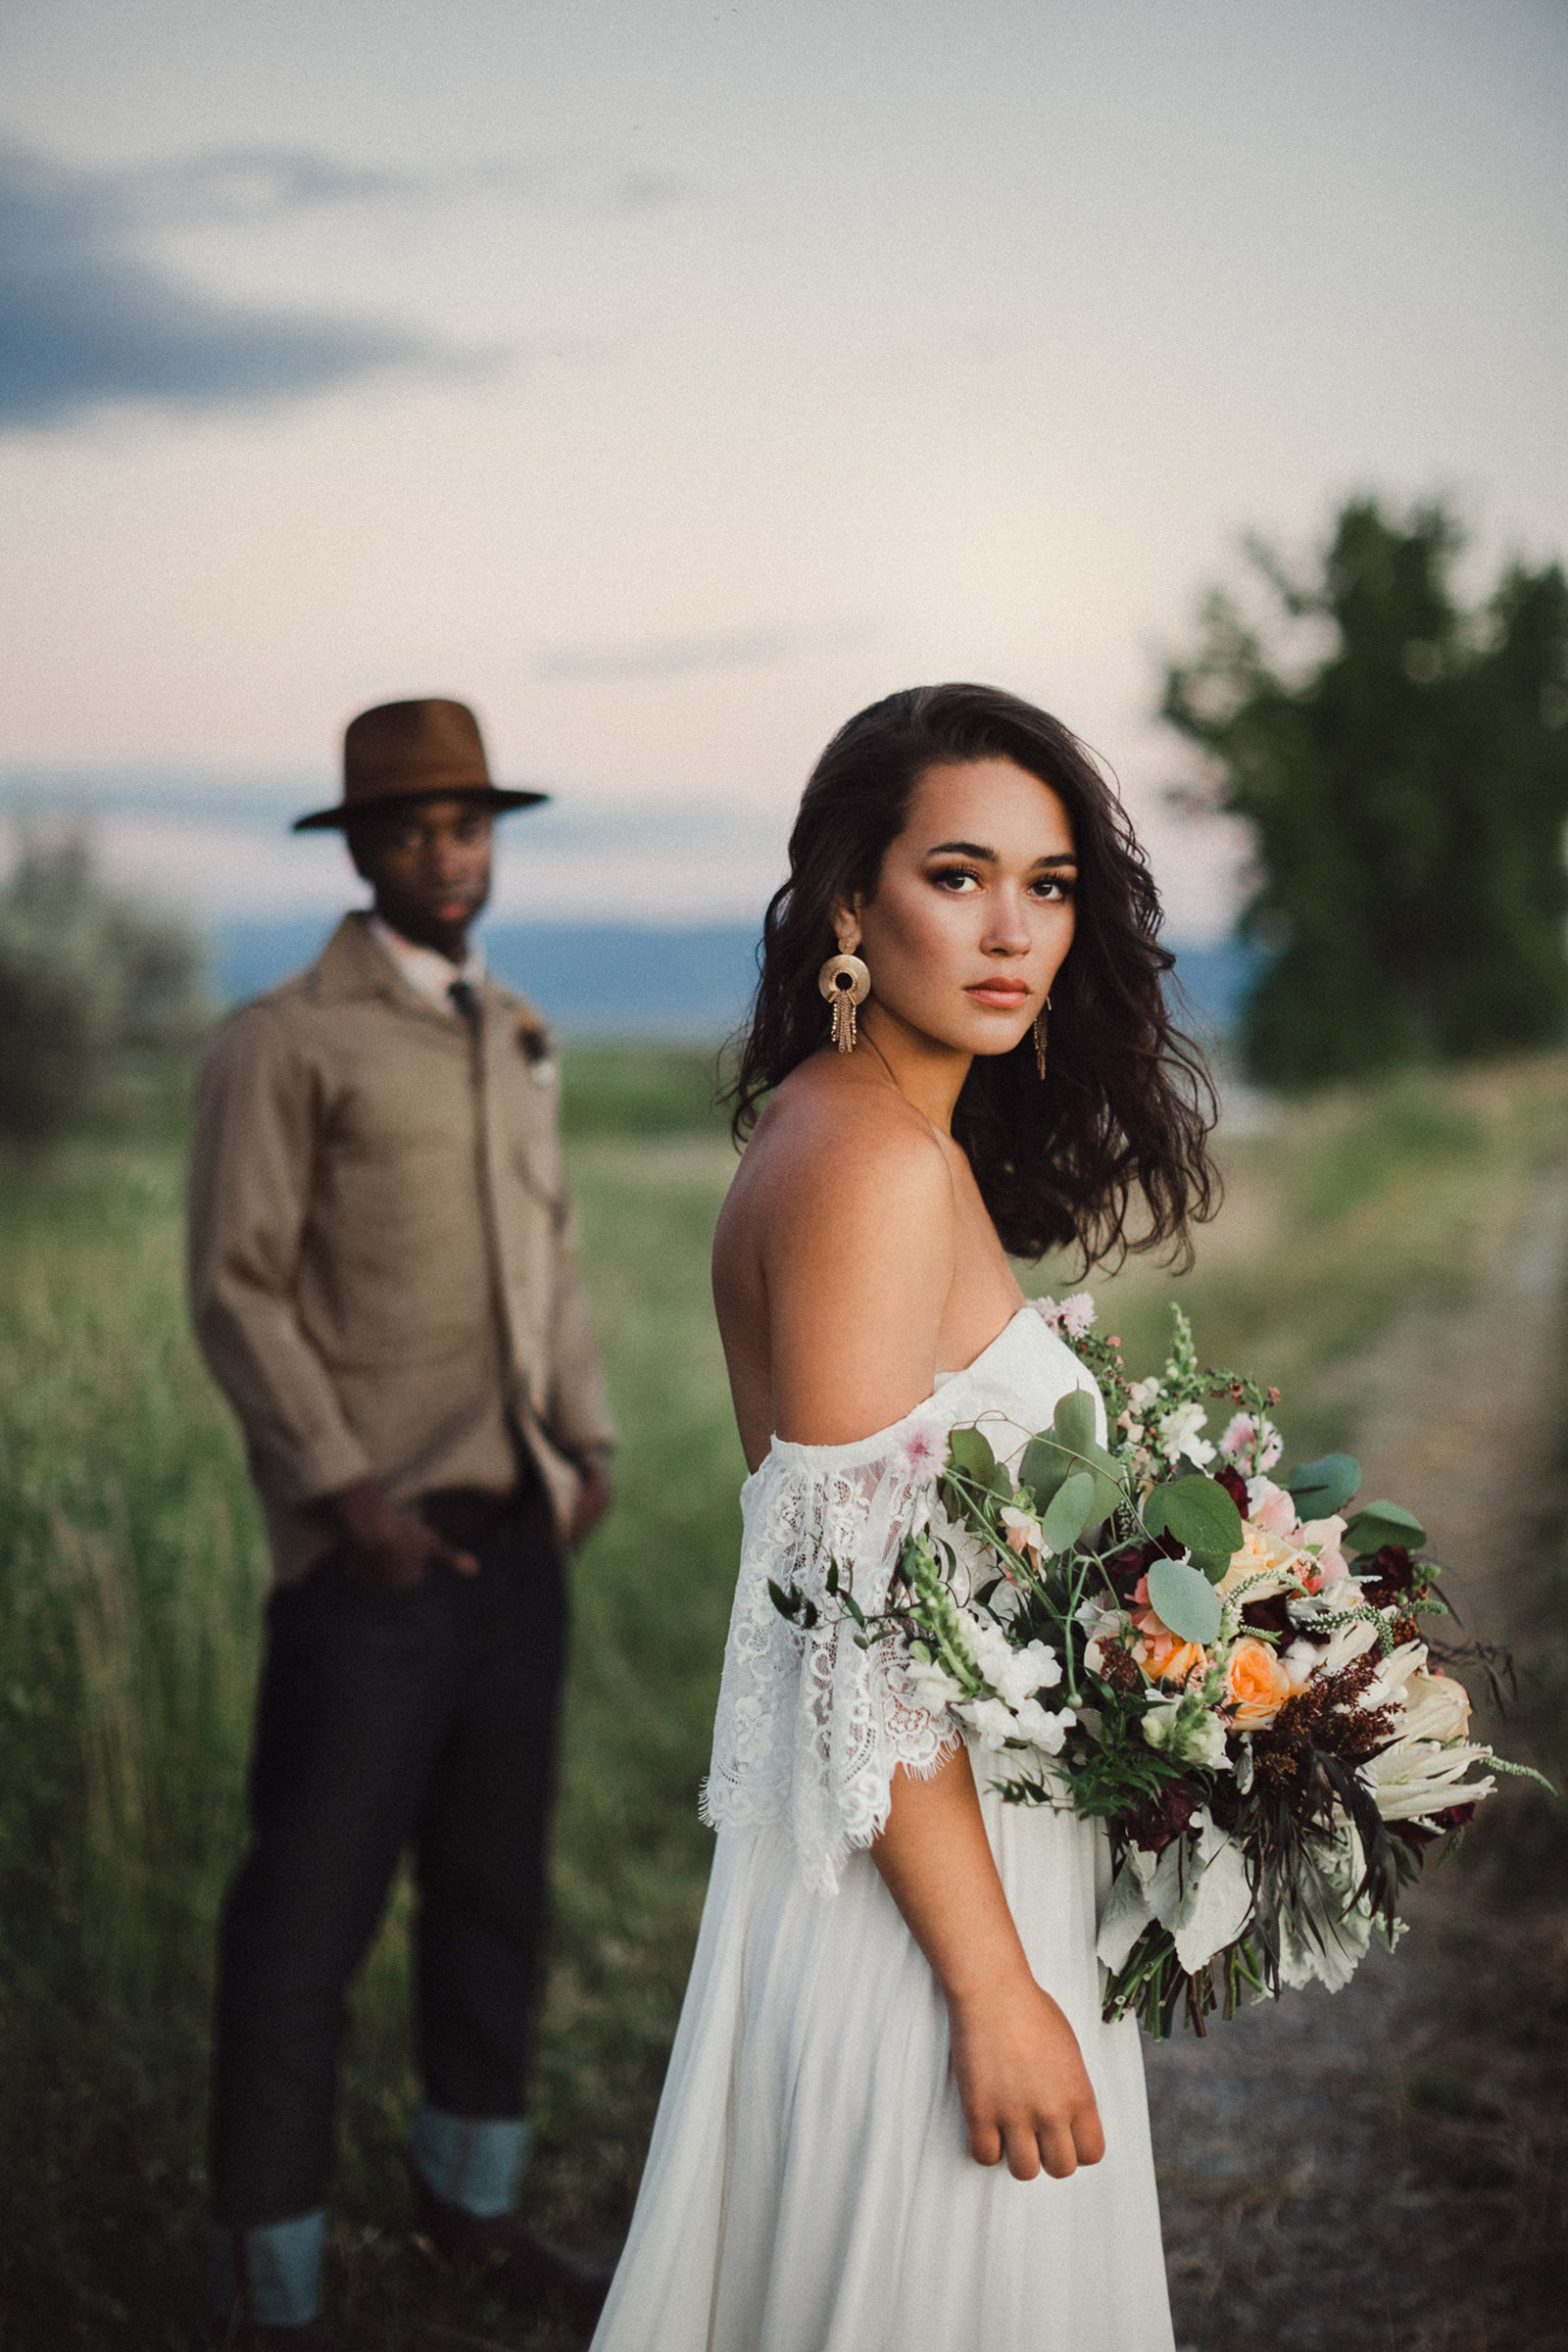 Indie styled wedding shoot in Montana, photographed by Sweetwater.